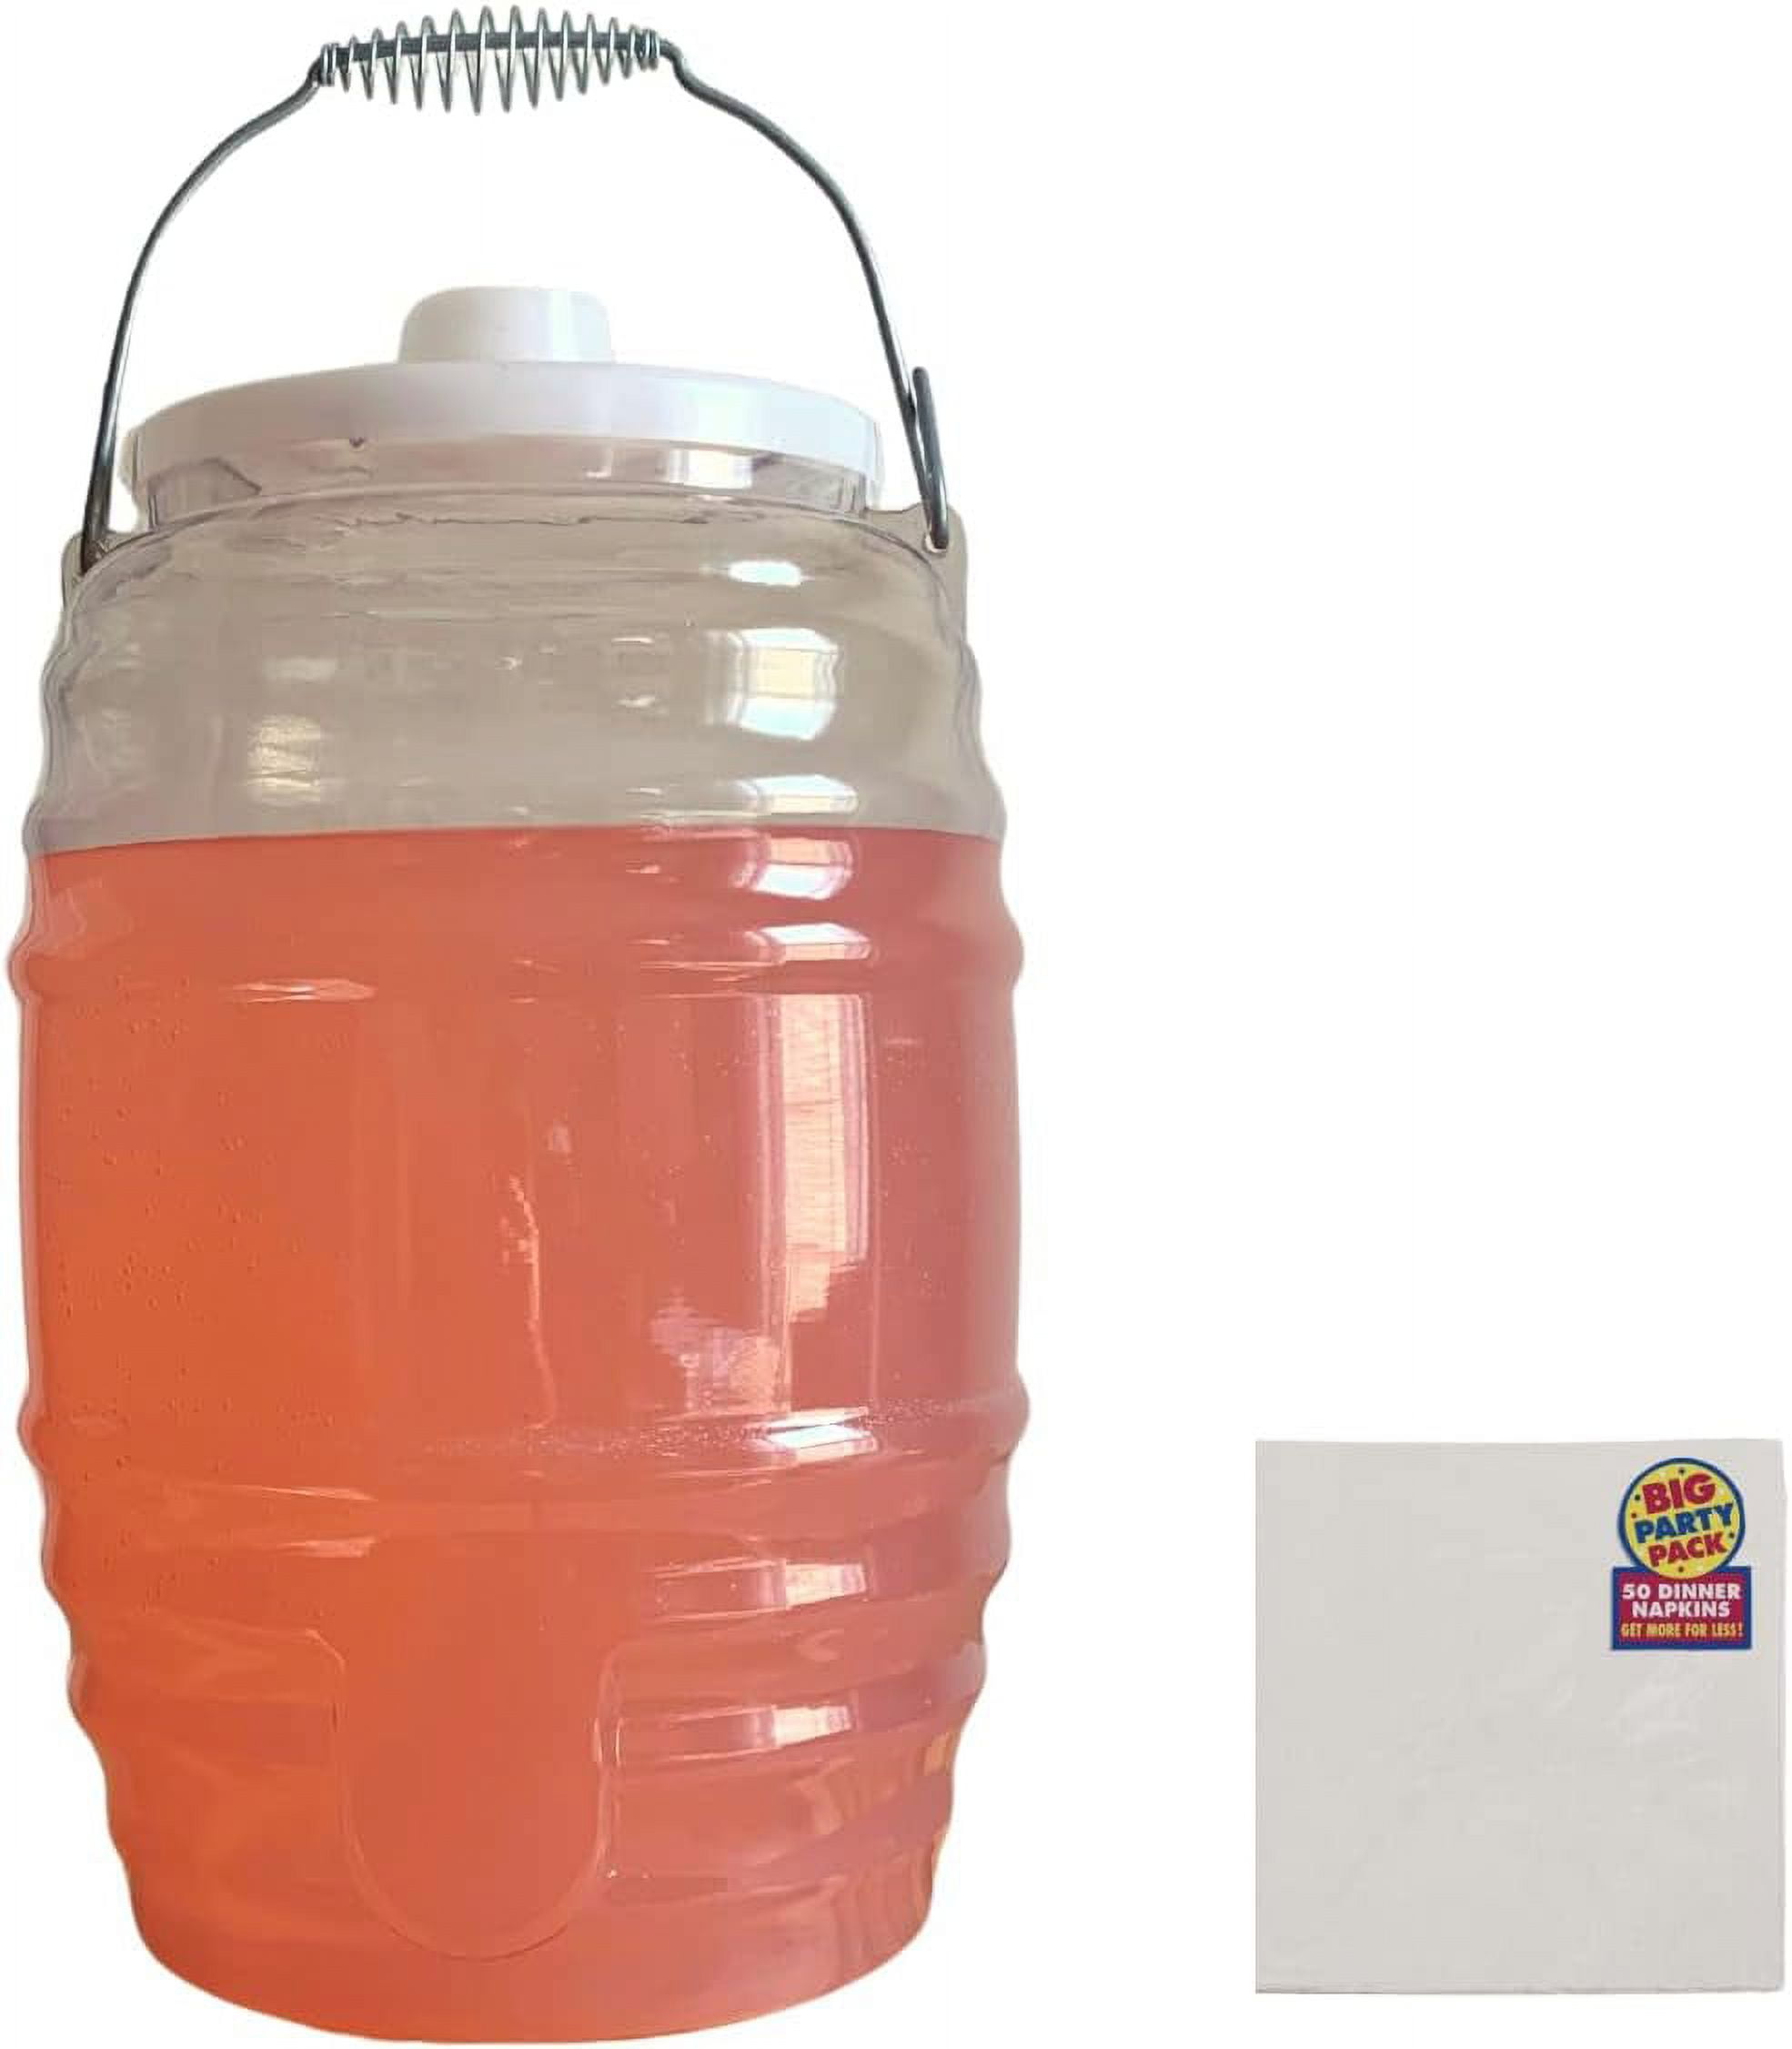 1 Gallon Jug with Lid and Spout - Aguas Frescas Vitrolero  Plastic Water Container - 1 Gallon Drink Dispenser - Large Beverage  Dispenser Ideal for Agua fresca and Juice 